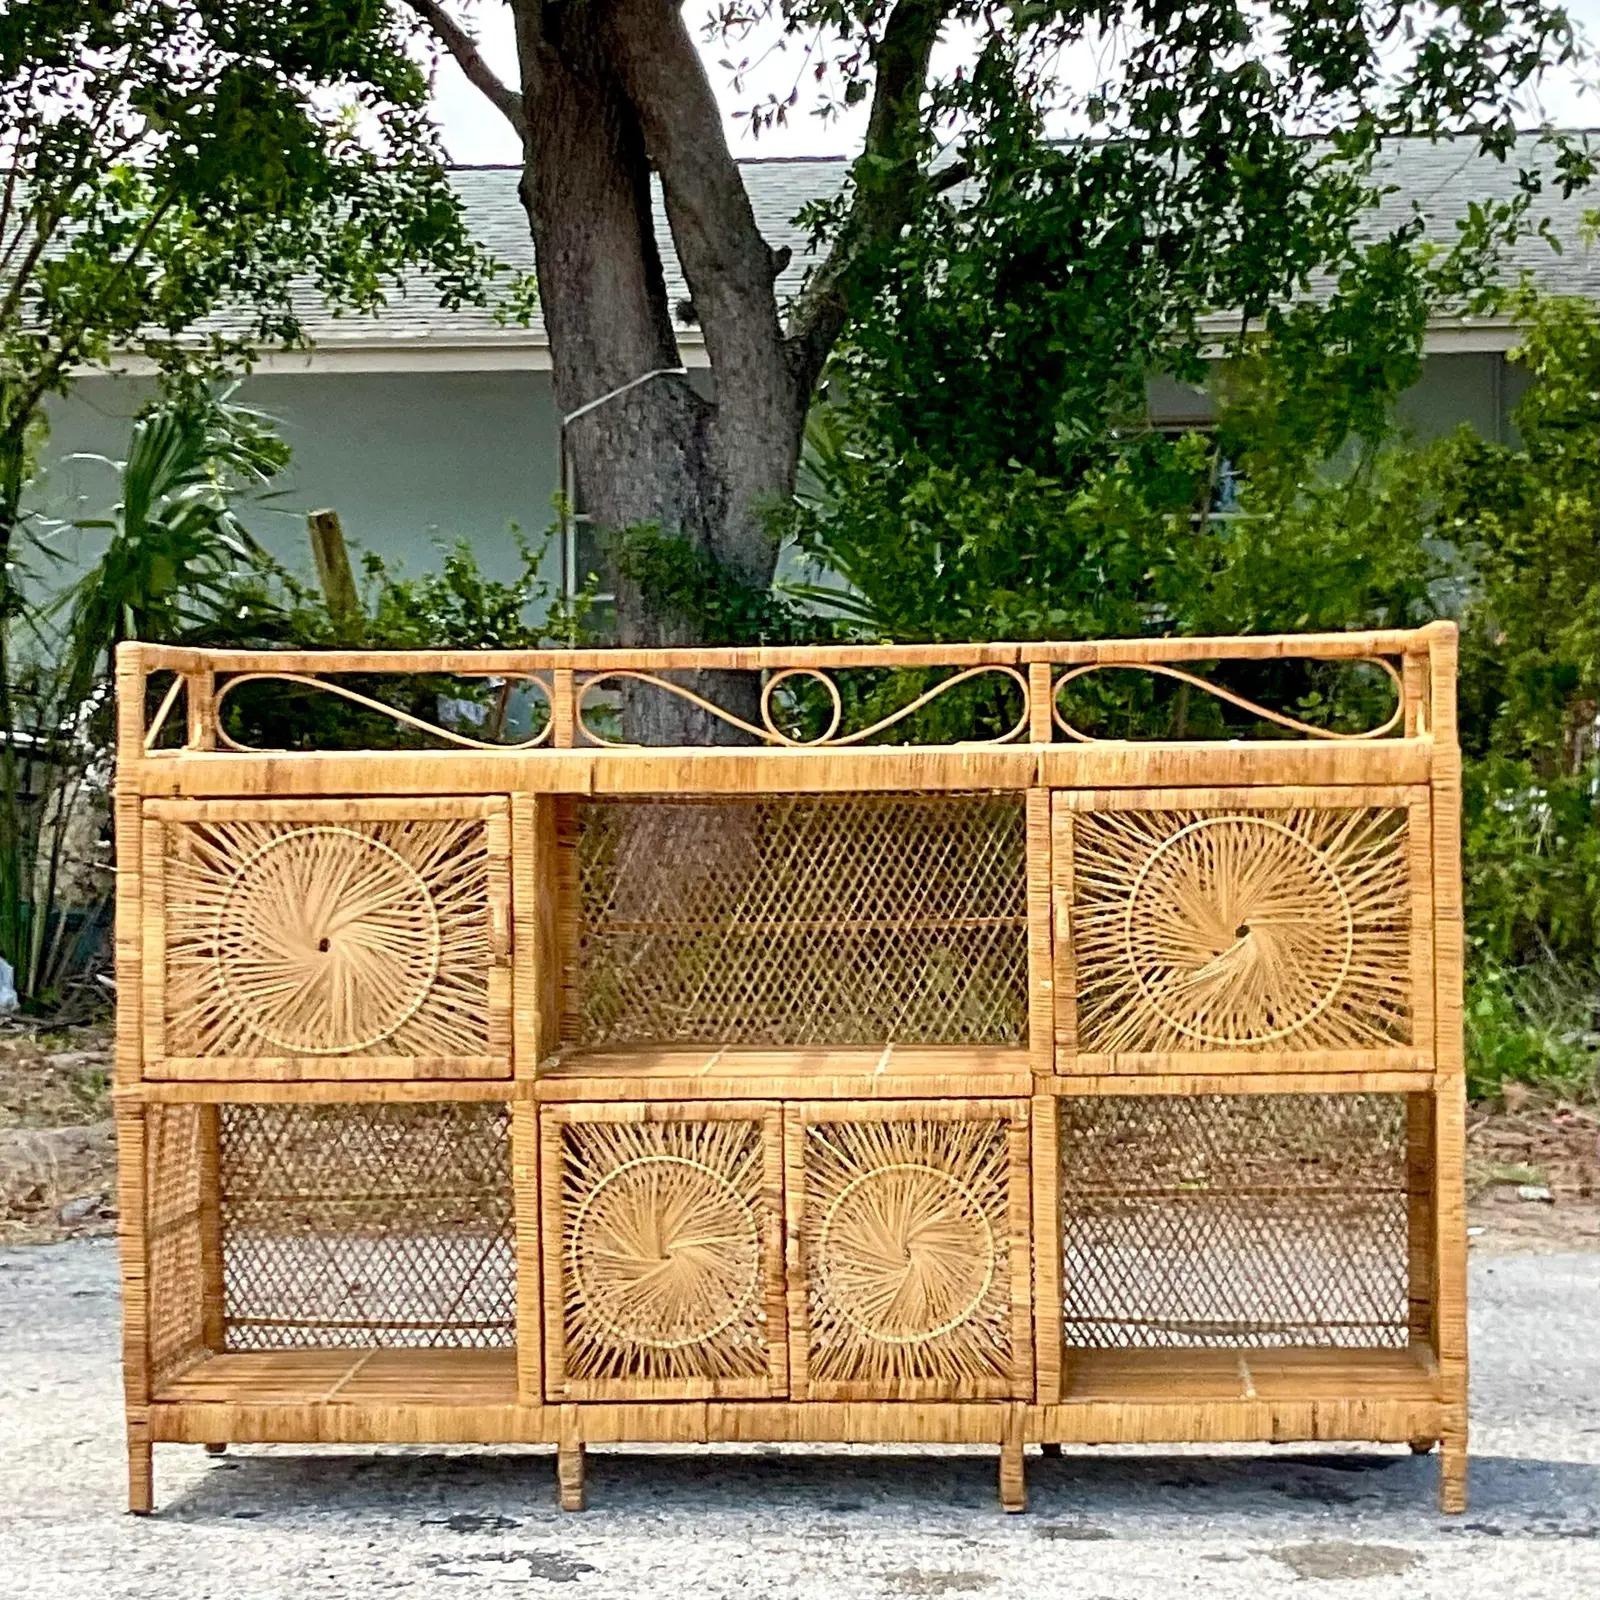 A fabulous vintage Coastal credenza. Beautiful open weave construction with lots of great storage below. The coveted Starburst design on all the door fronts. Acquired from a Palm Beach estate.